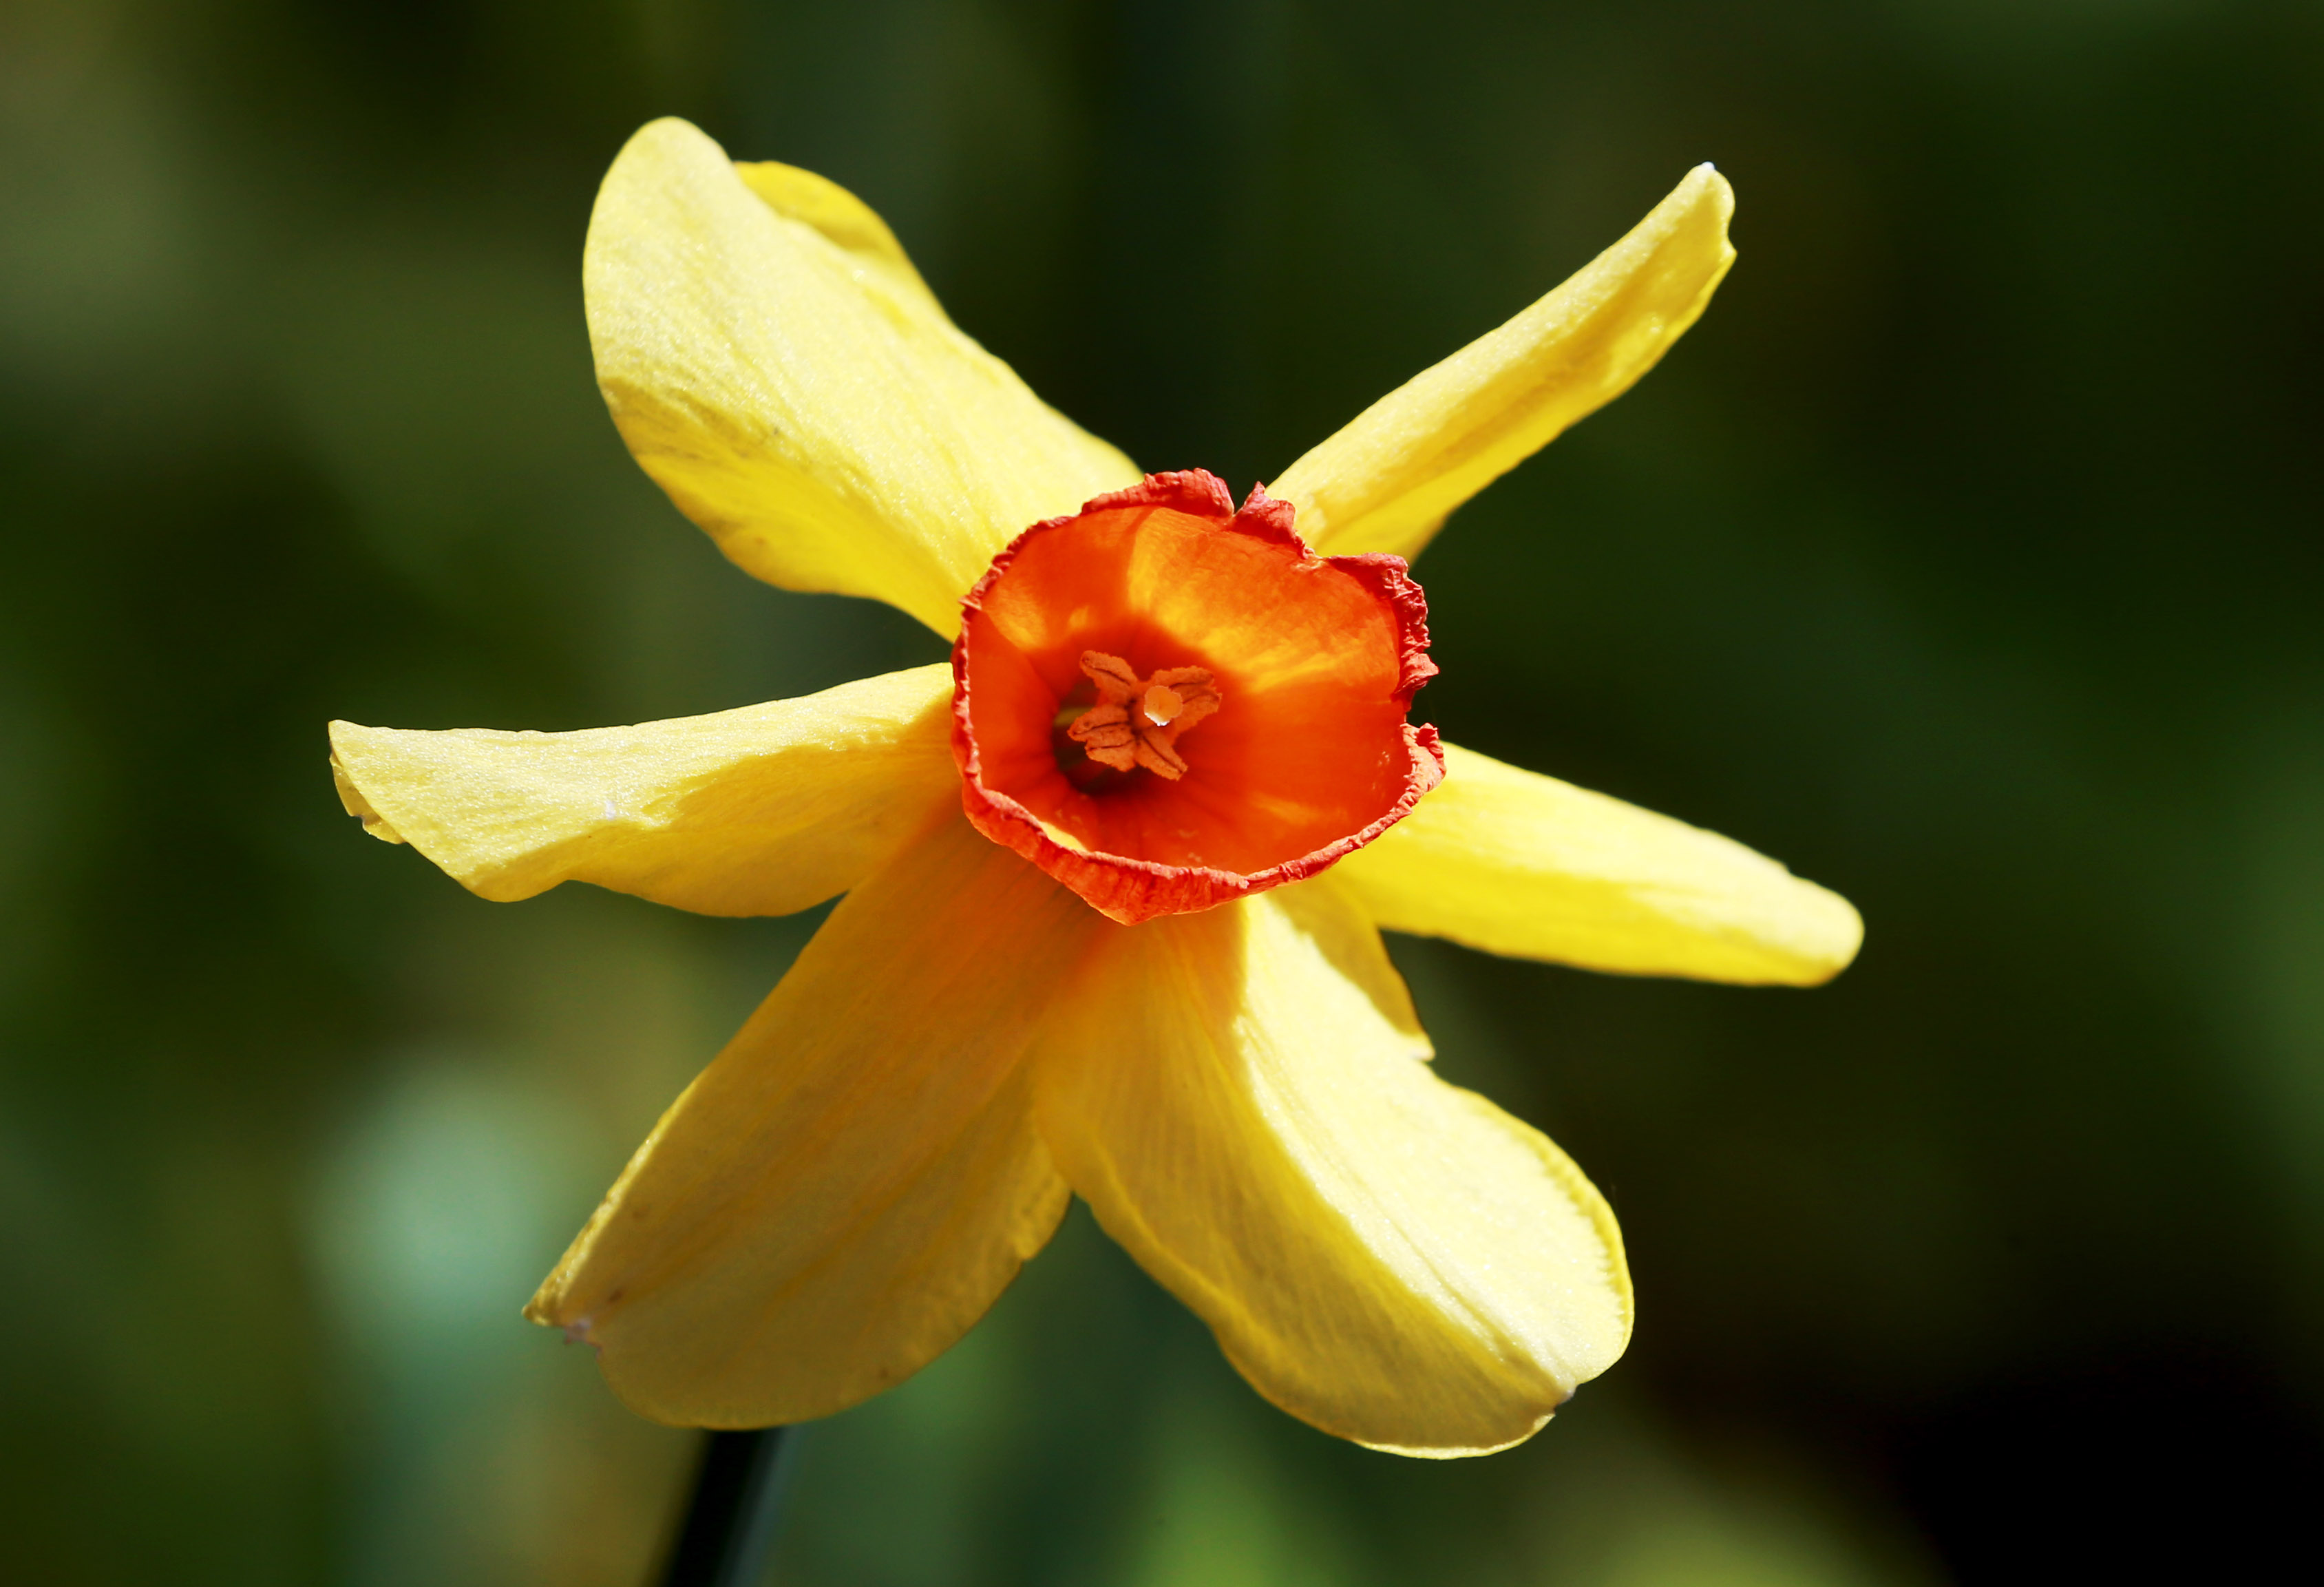 Celebrating Spring's First Flower: The Daffodil - Avas Flowers